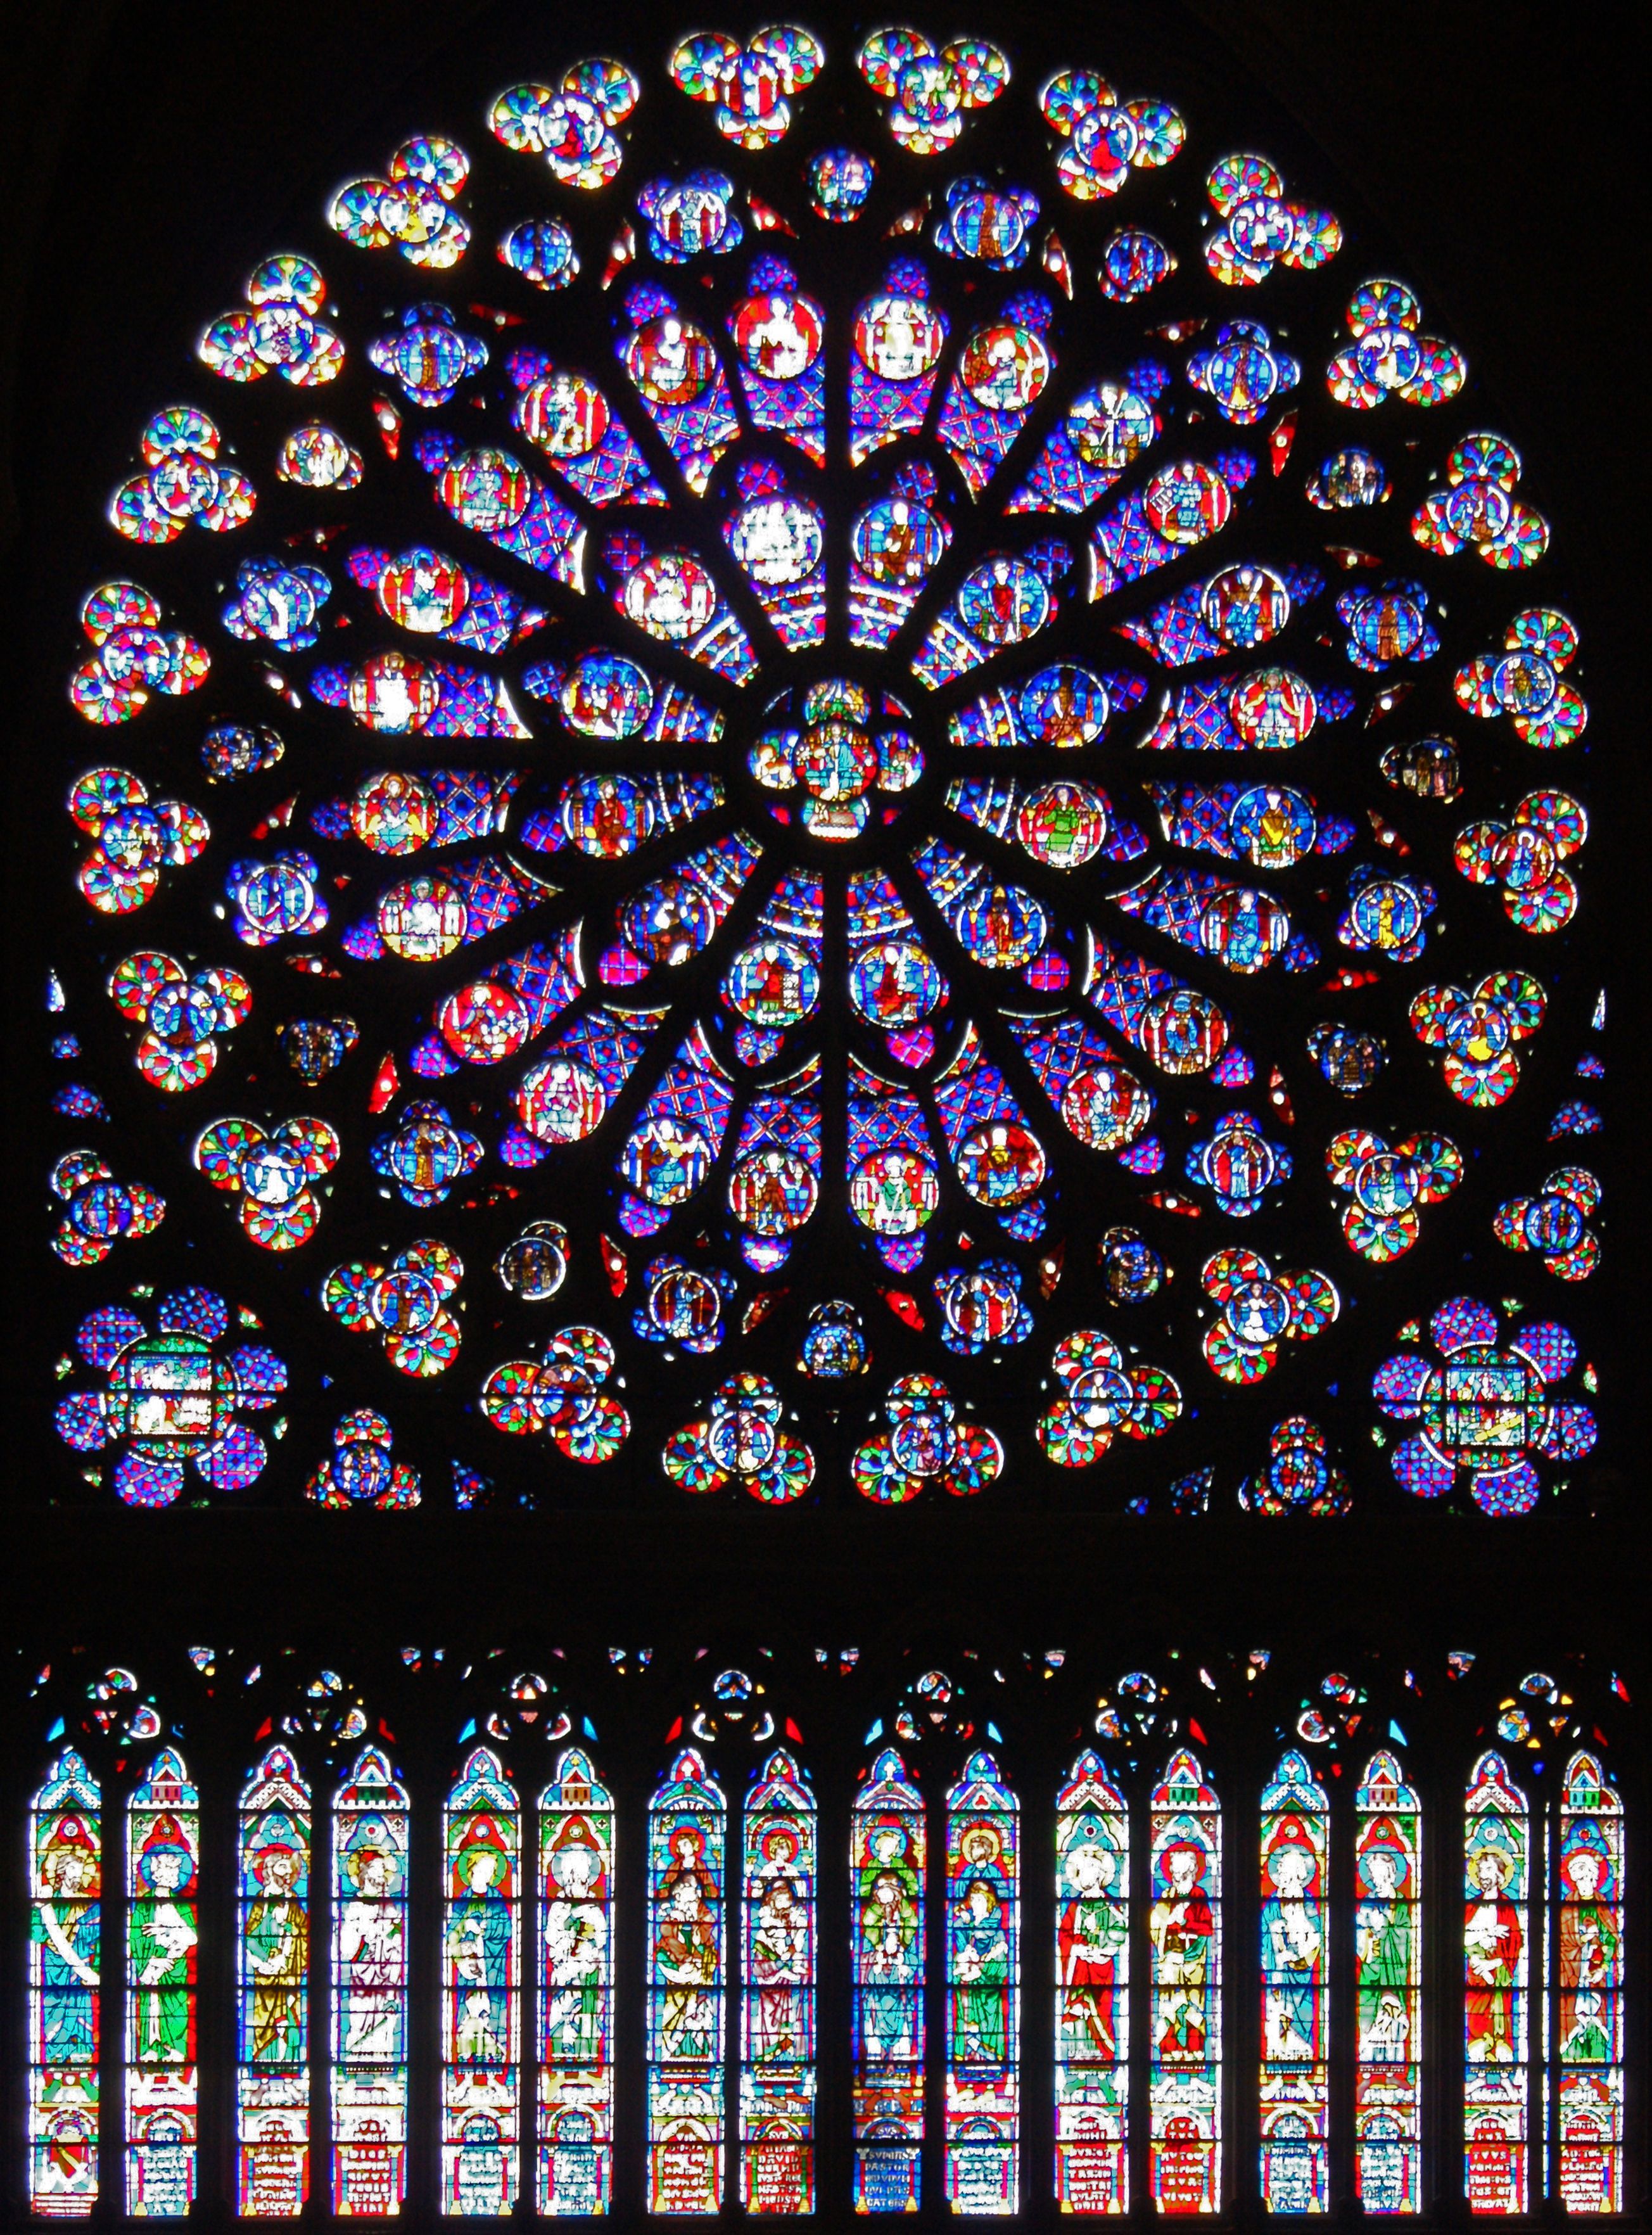 the jean de chelles rose window at notre dame cathedral